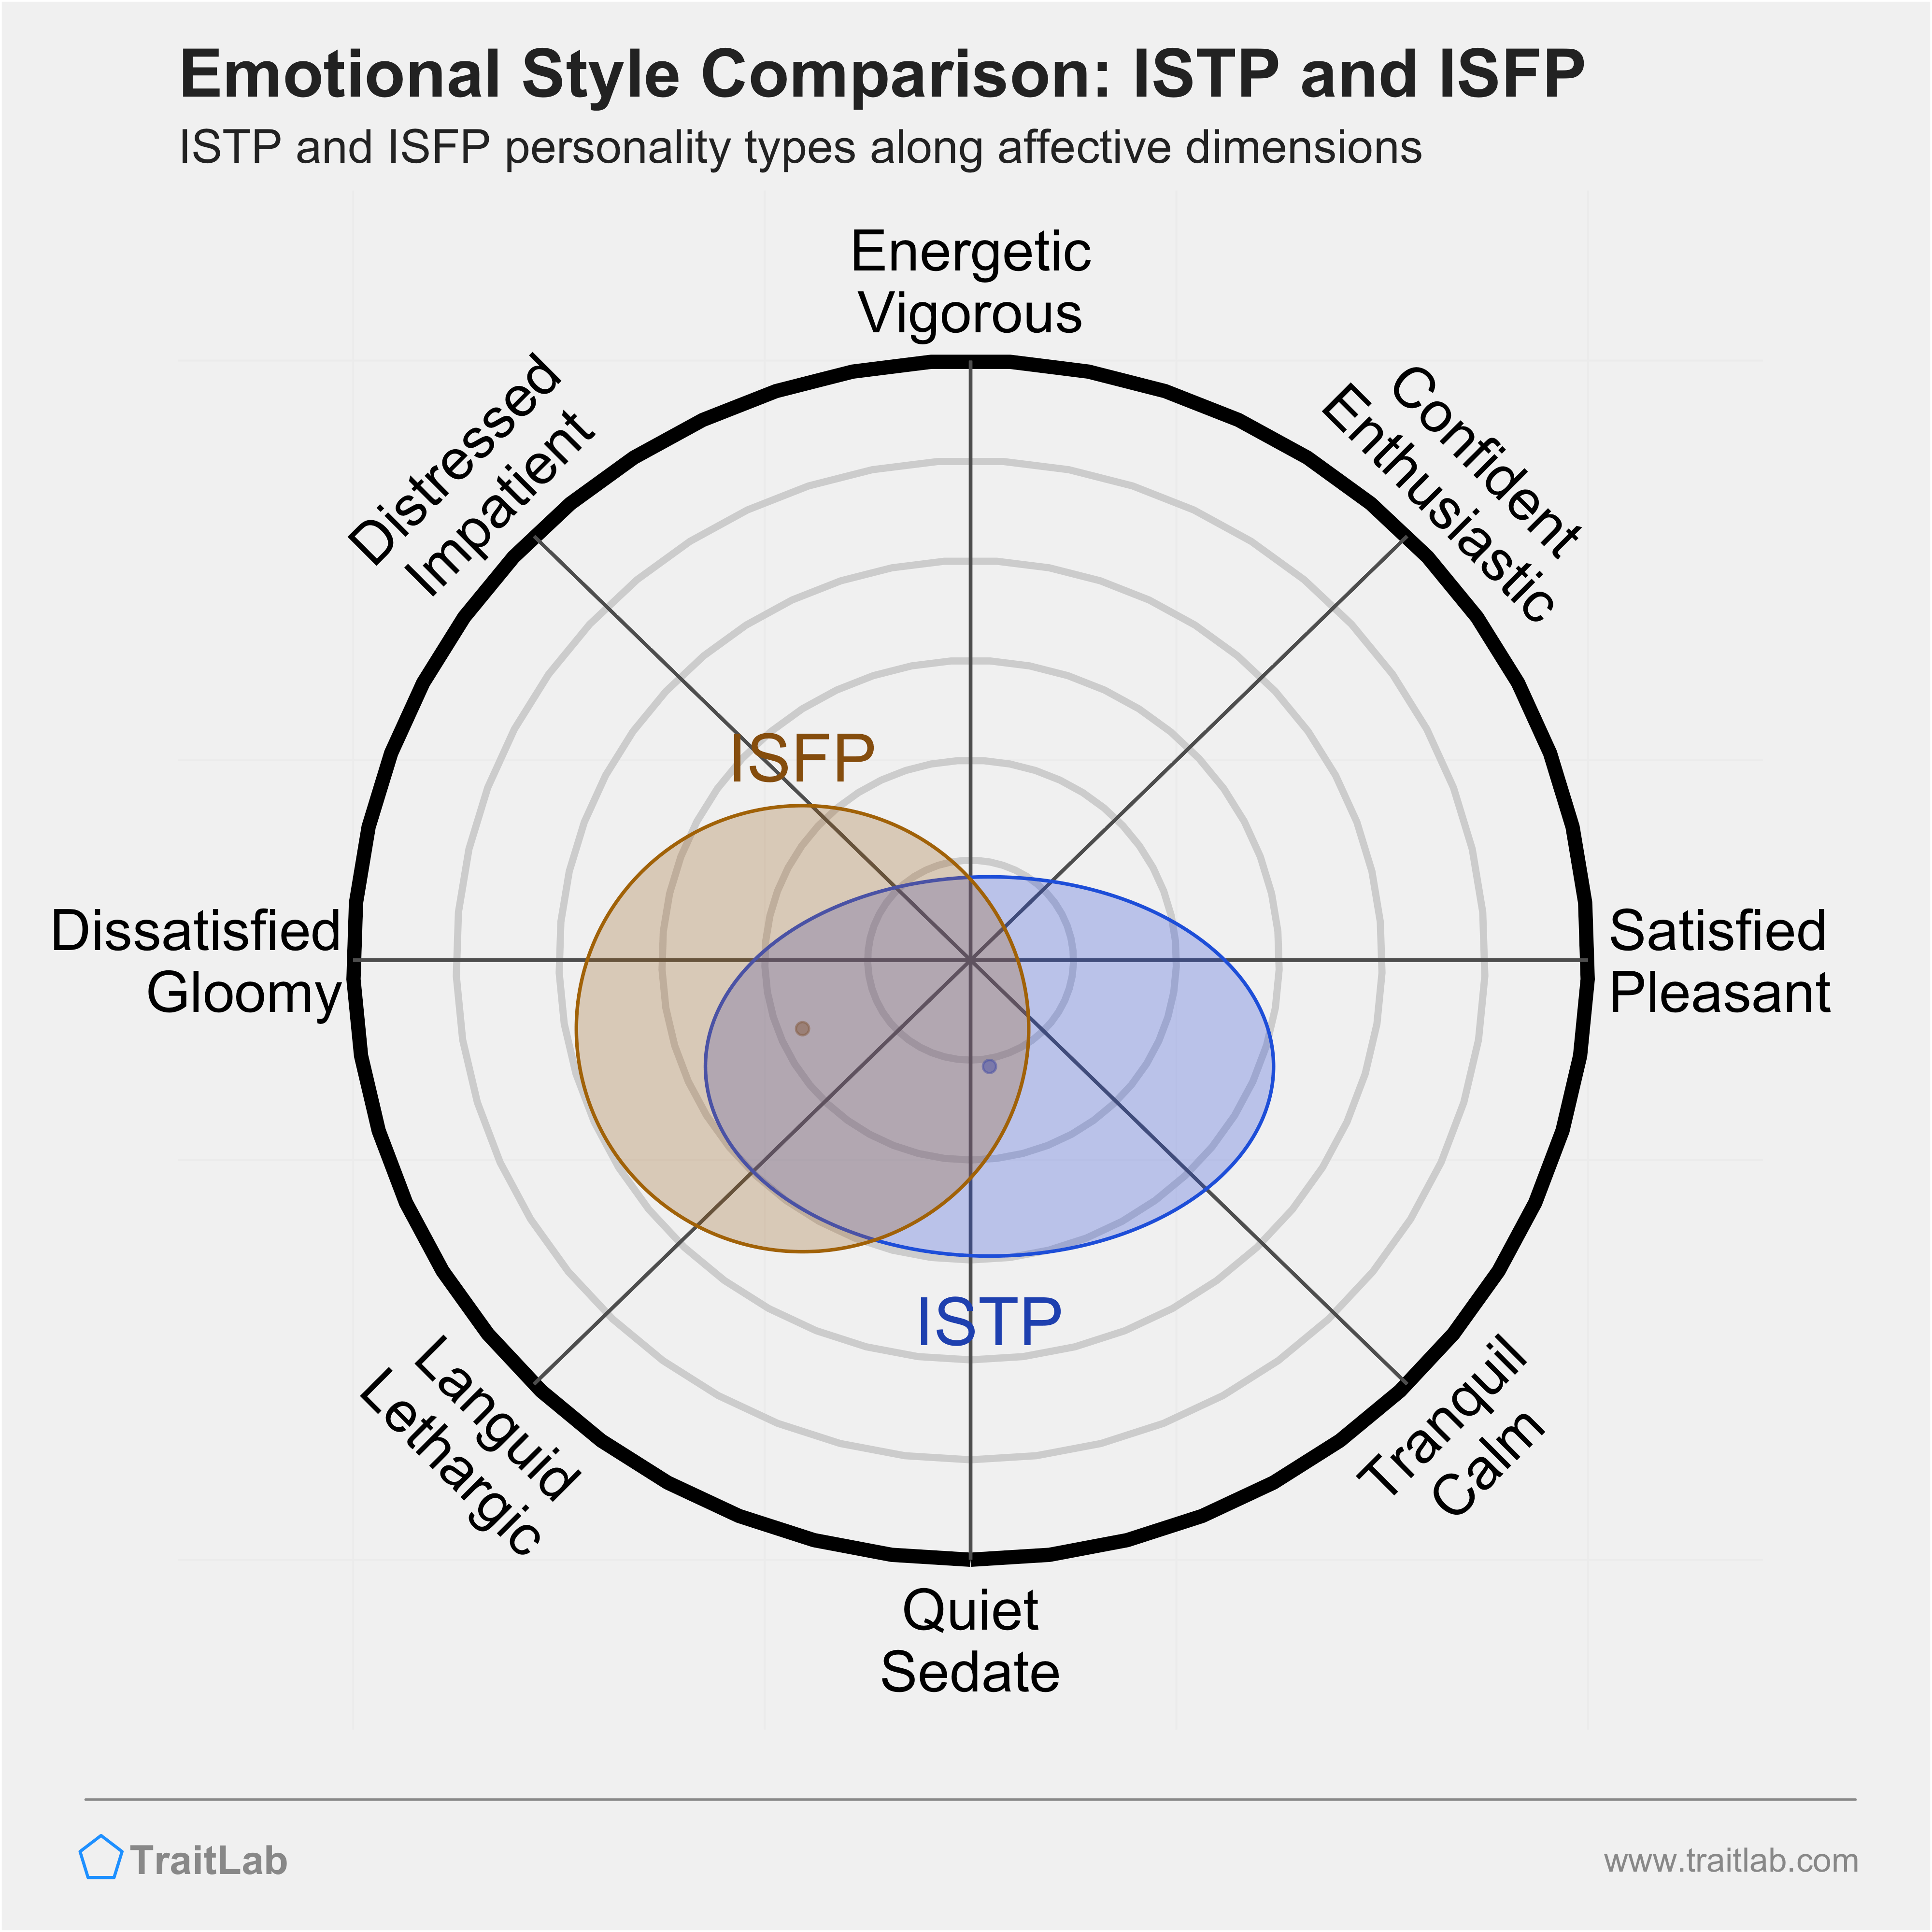 ISTP and ISFP comparison across emotional (affective) dimensions